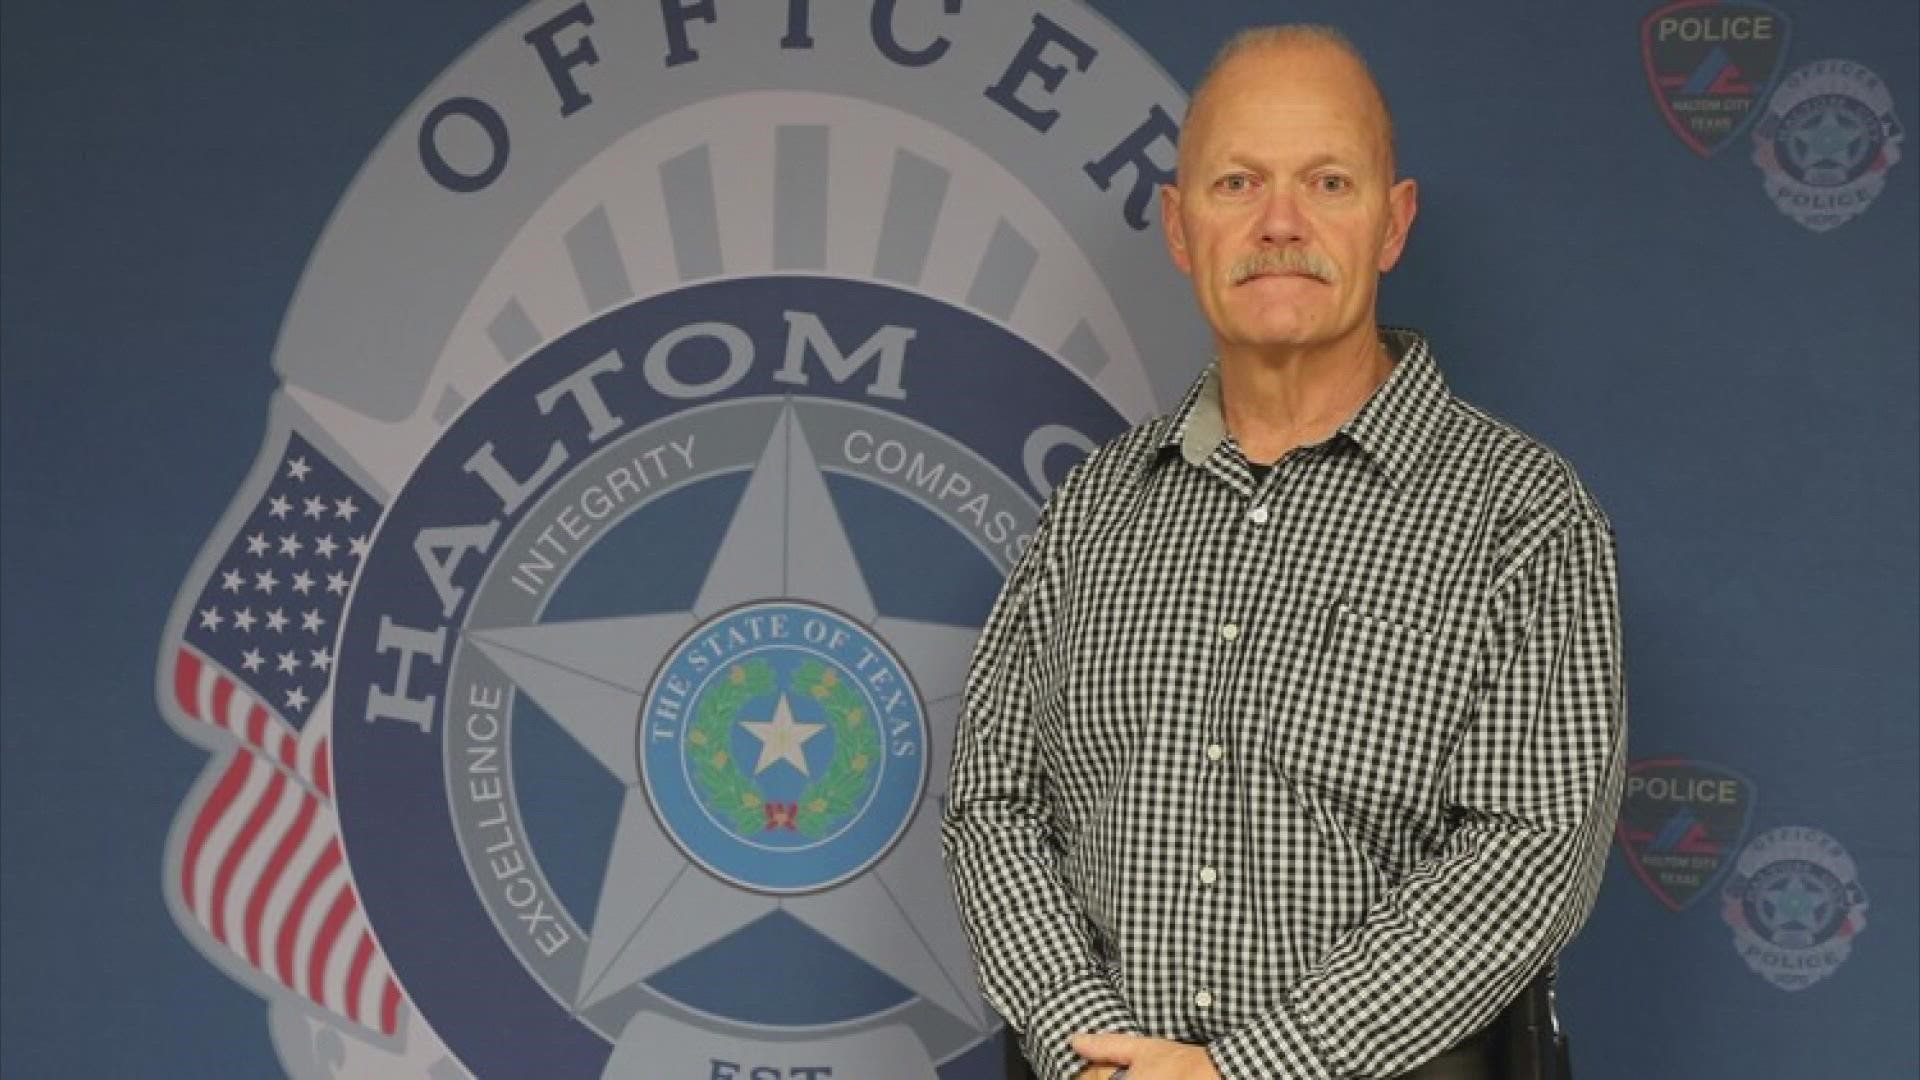 Police say retired Cpl. Tony Miller died in a fire at his home in Azle, Texas.